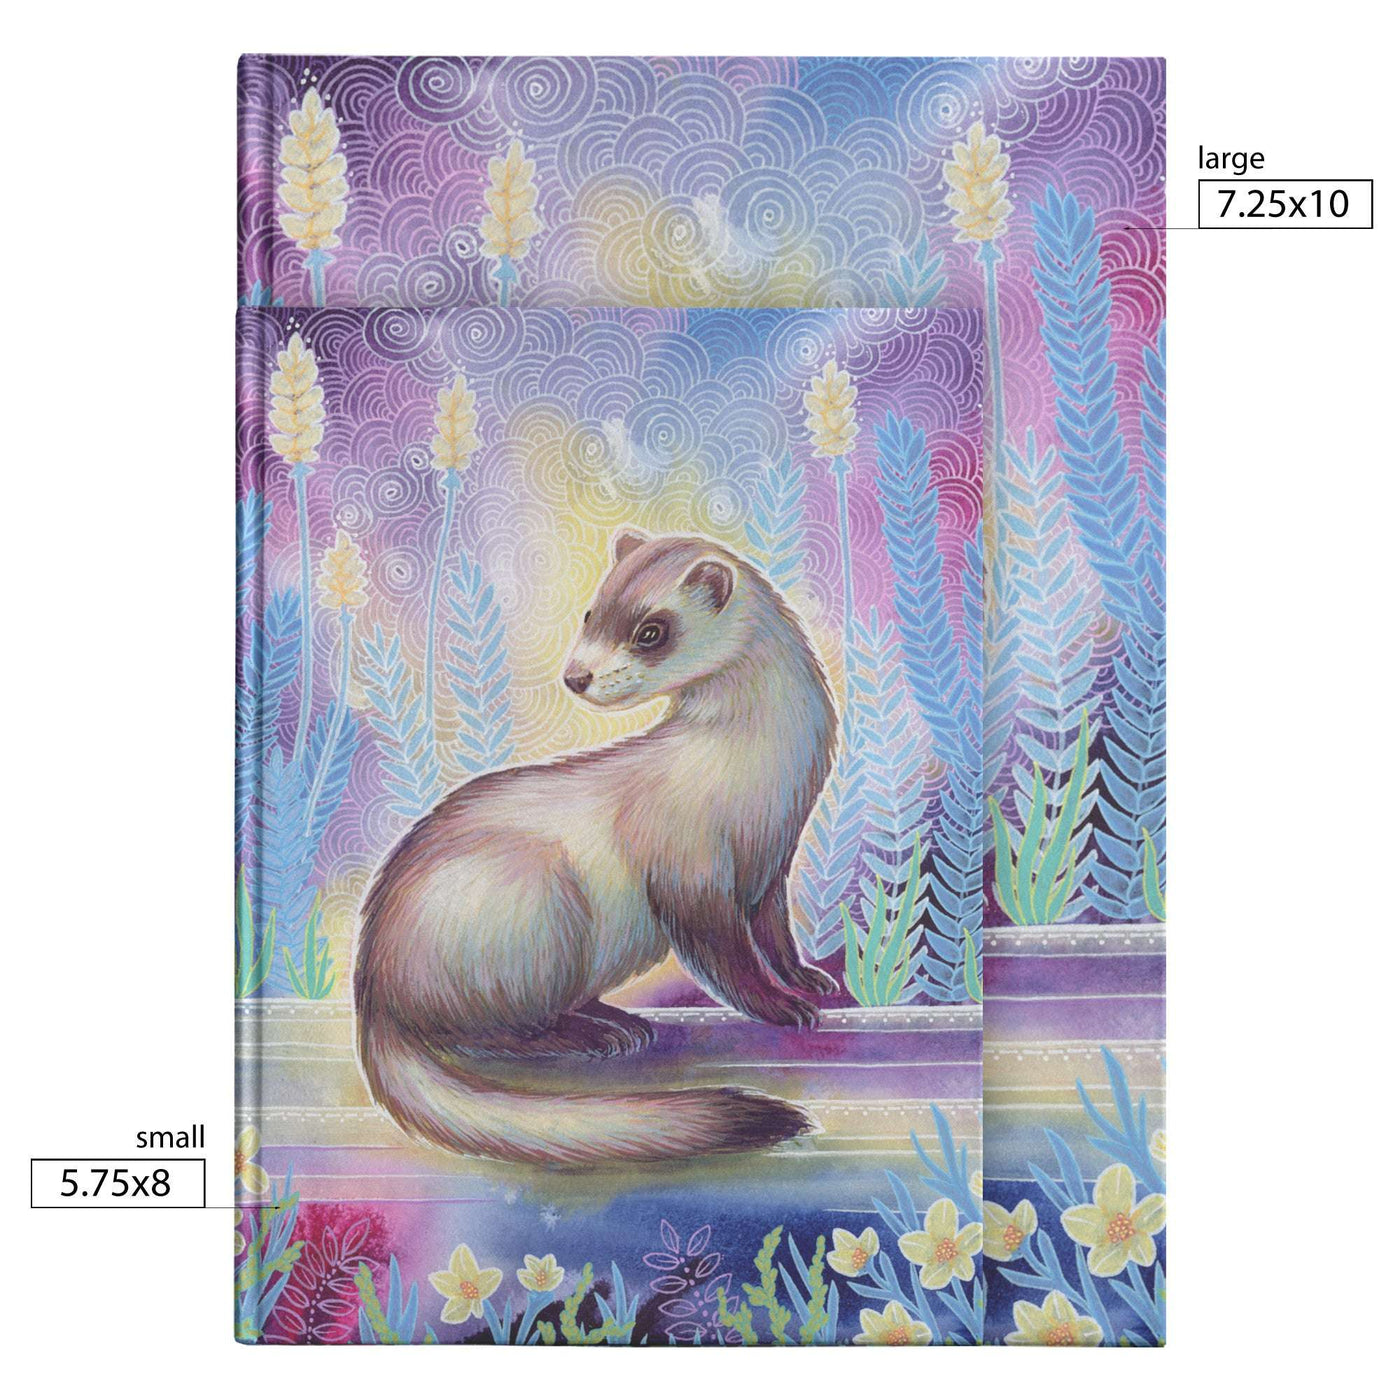 Ferret Journal featuring a painting of a ferret in a whimsical, colorful forest setting with spiral clouds and floral elements.